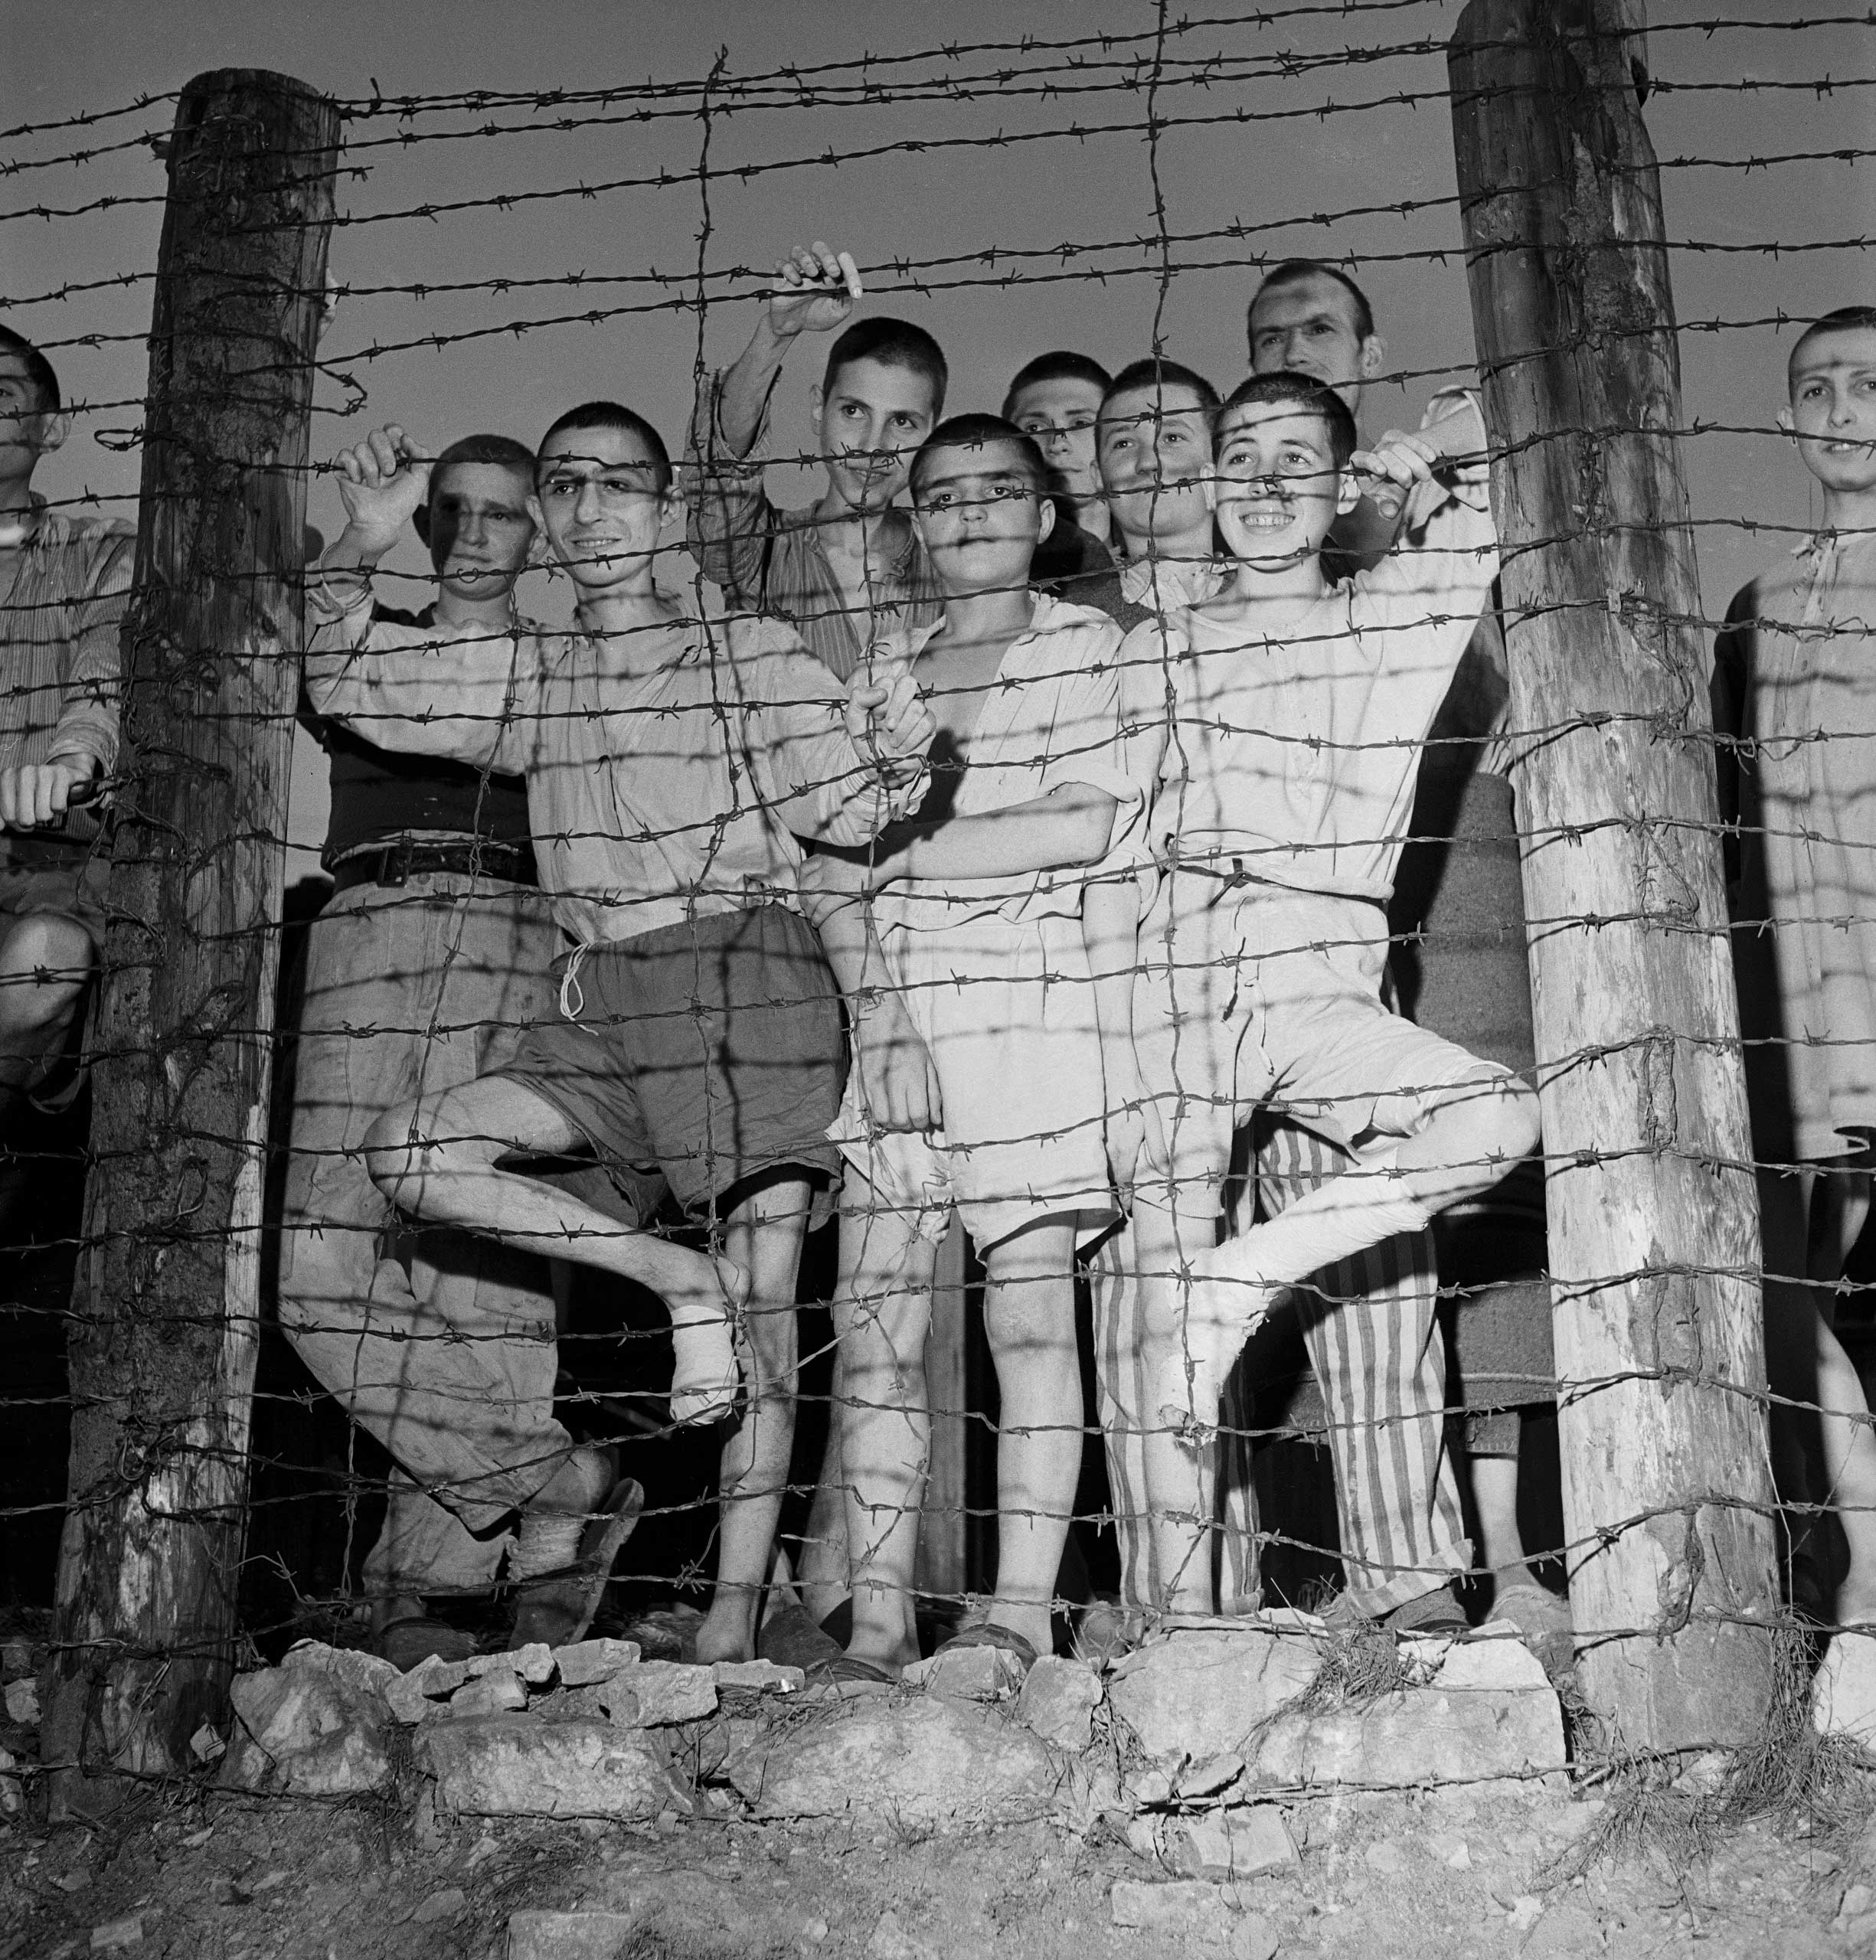 Not published in LIFE. Prisoners at Buchenwald gaze from behind barbed wire during the camp's liberation by American forces, April 1945.